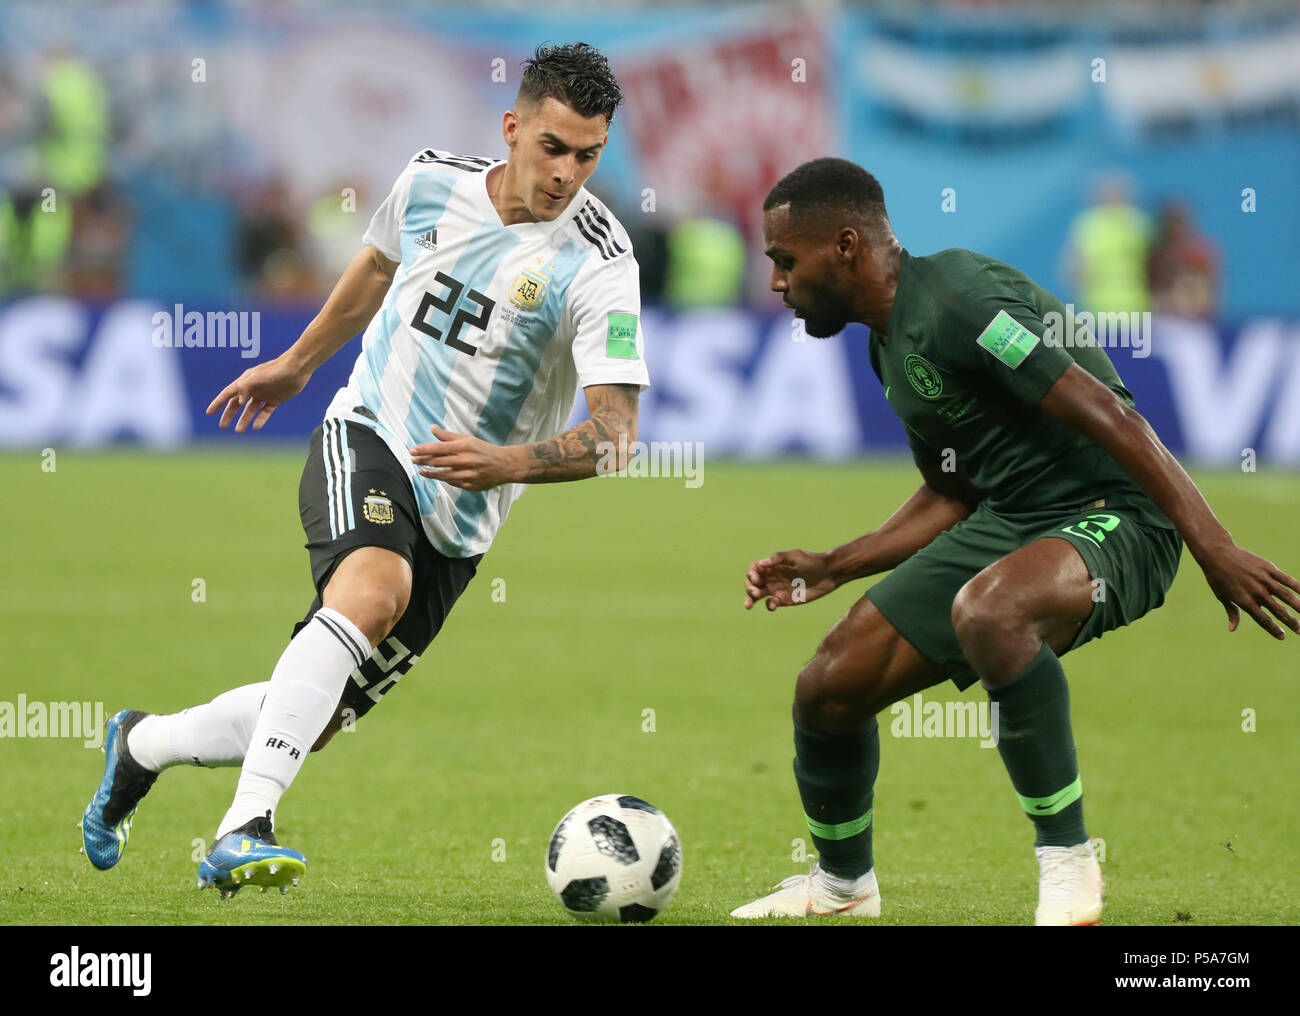 Moscow, Russia. 26th June, 2018. Soccer, World Cup 2018, Preliminary round, Group D, 3rd game day, Nigeria vs Argentina at the St. Petersburg Stadium: Argentina's Cristian Pavon (L) and Nigeria's Bryan Idowu vie for the ball. Credit: Cezaro De Luca/dpa/Alamy Live News Stock Photo